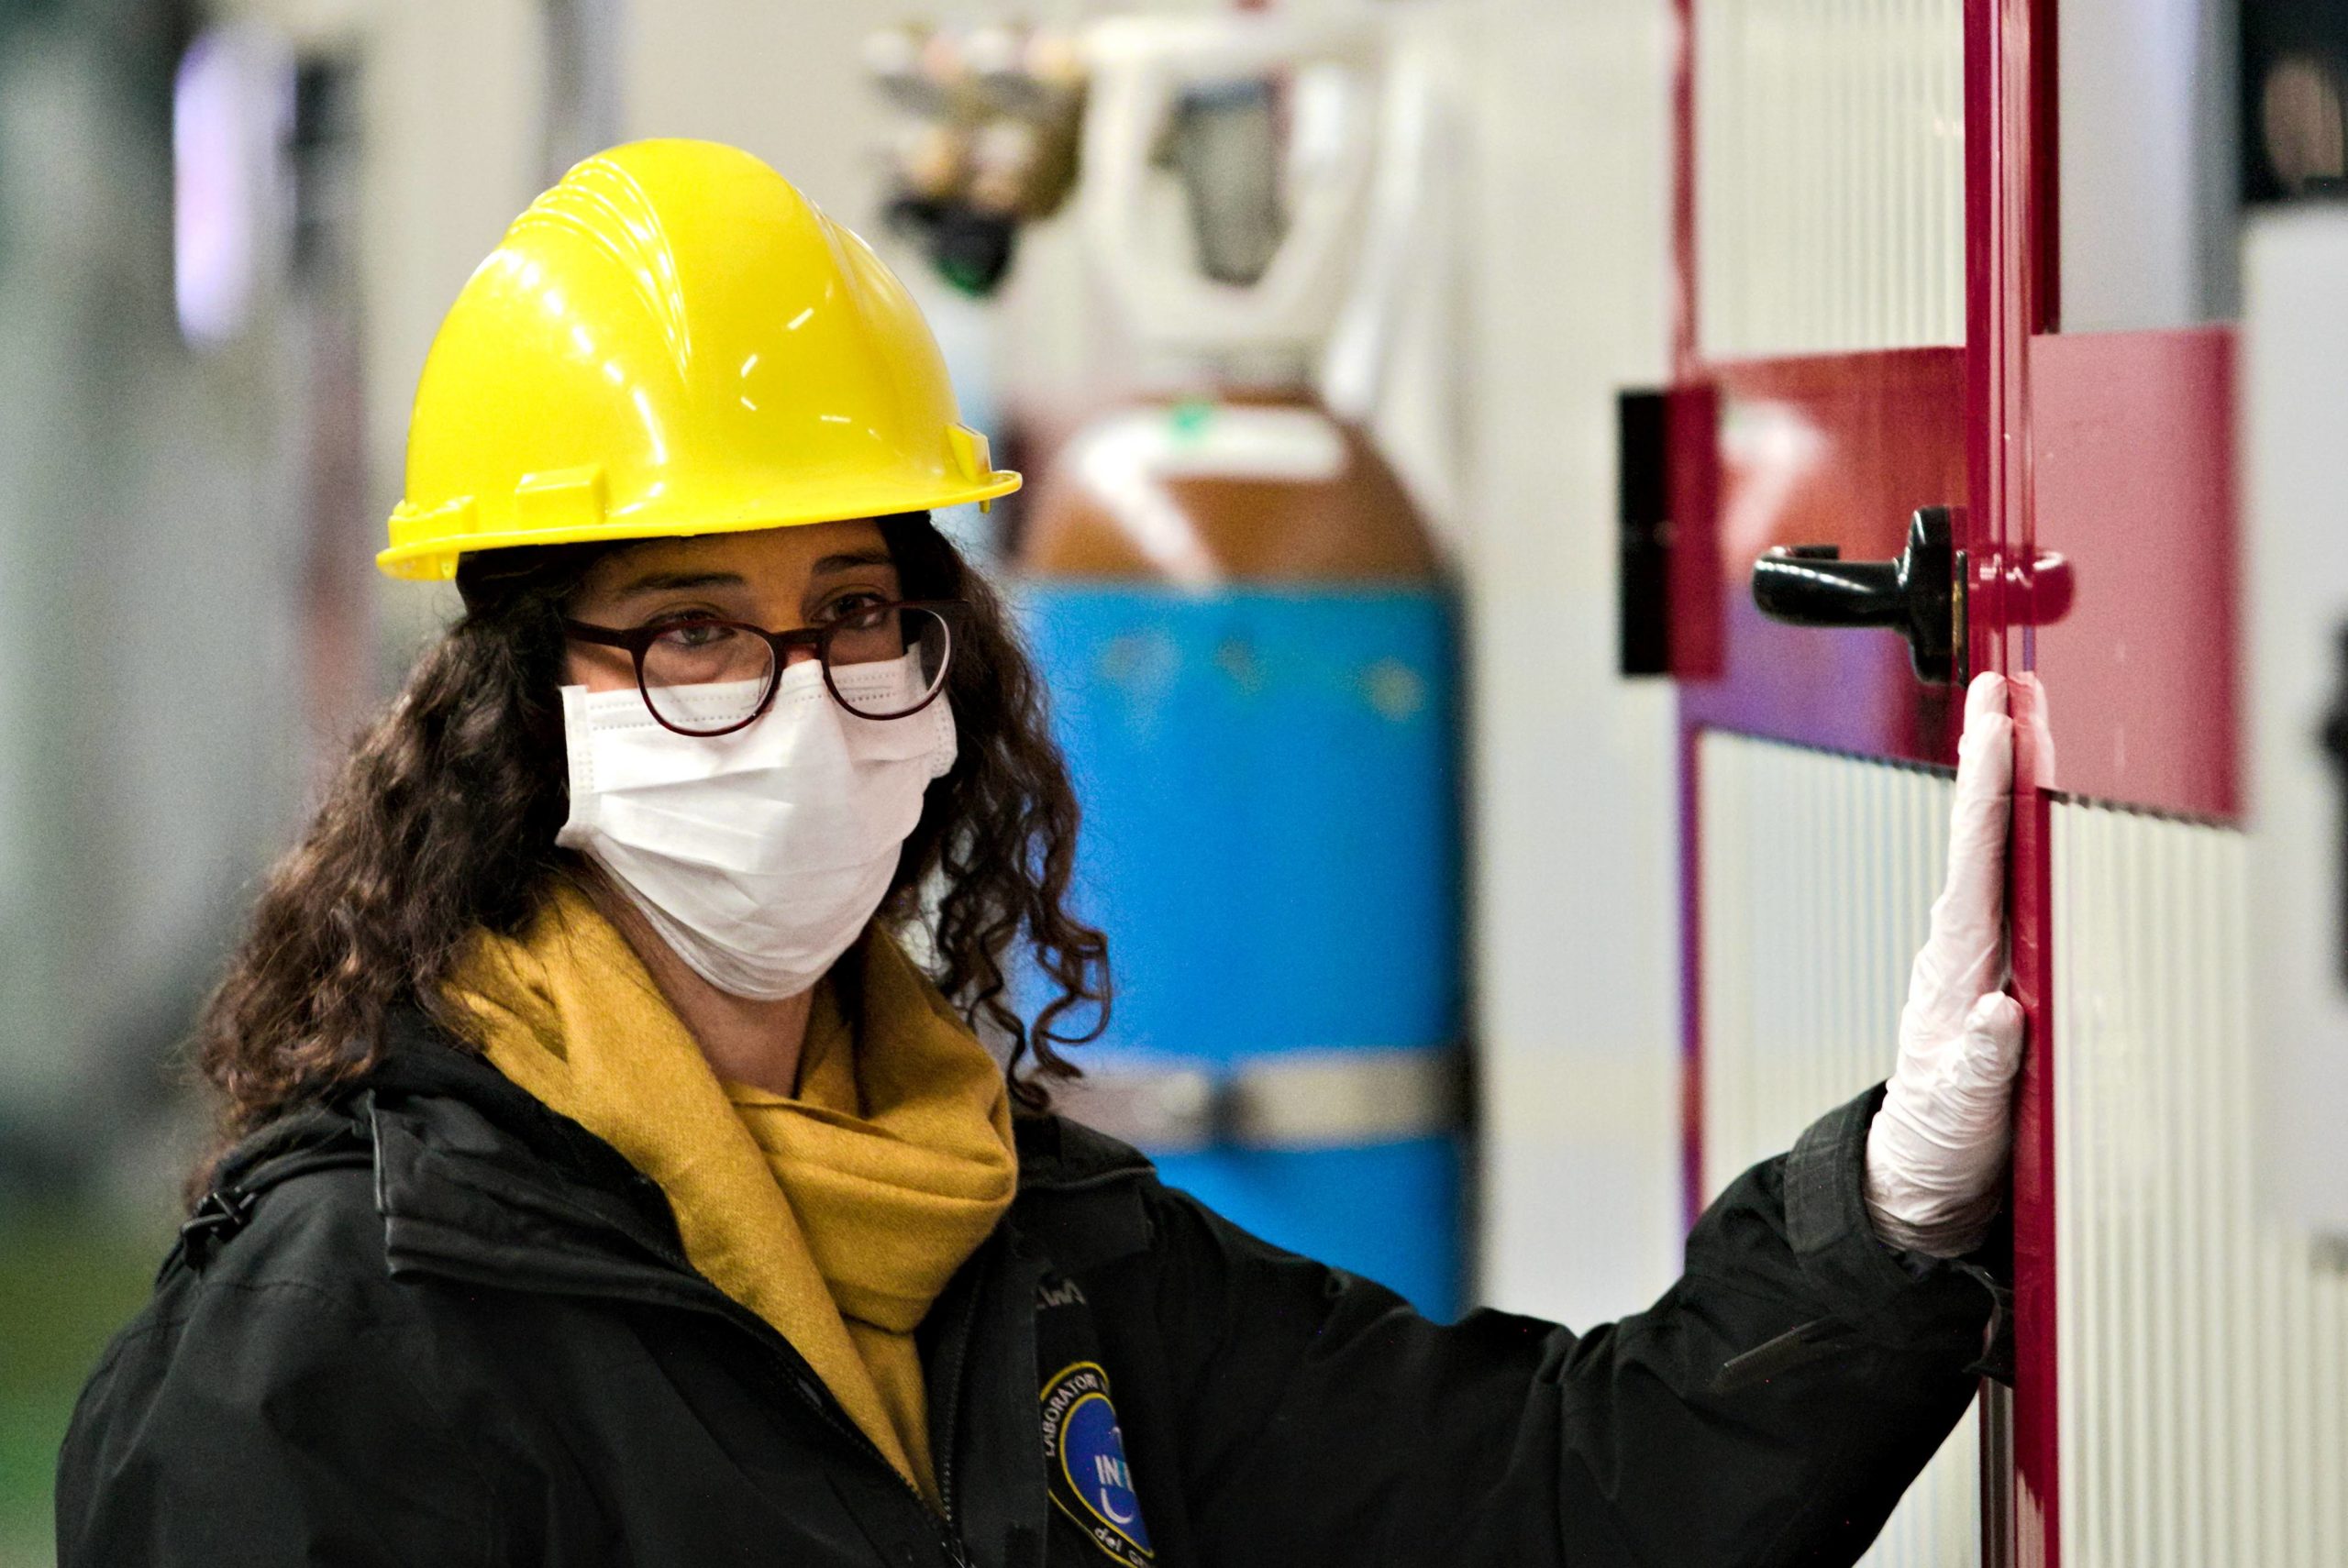 Image - Laura Marini now wears a protective mask and gloves, in addition to a hard hat, during her visits to the CUORE experiment site. (Credit: Gran Sasso National Laboratory – INFN)